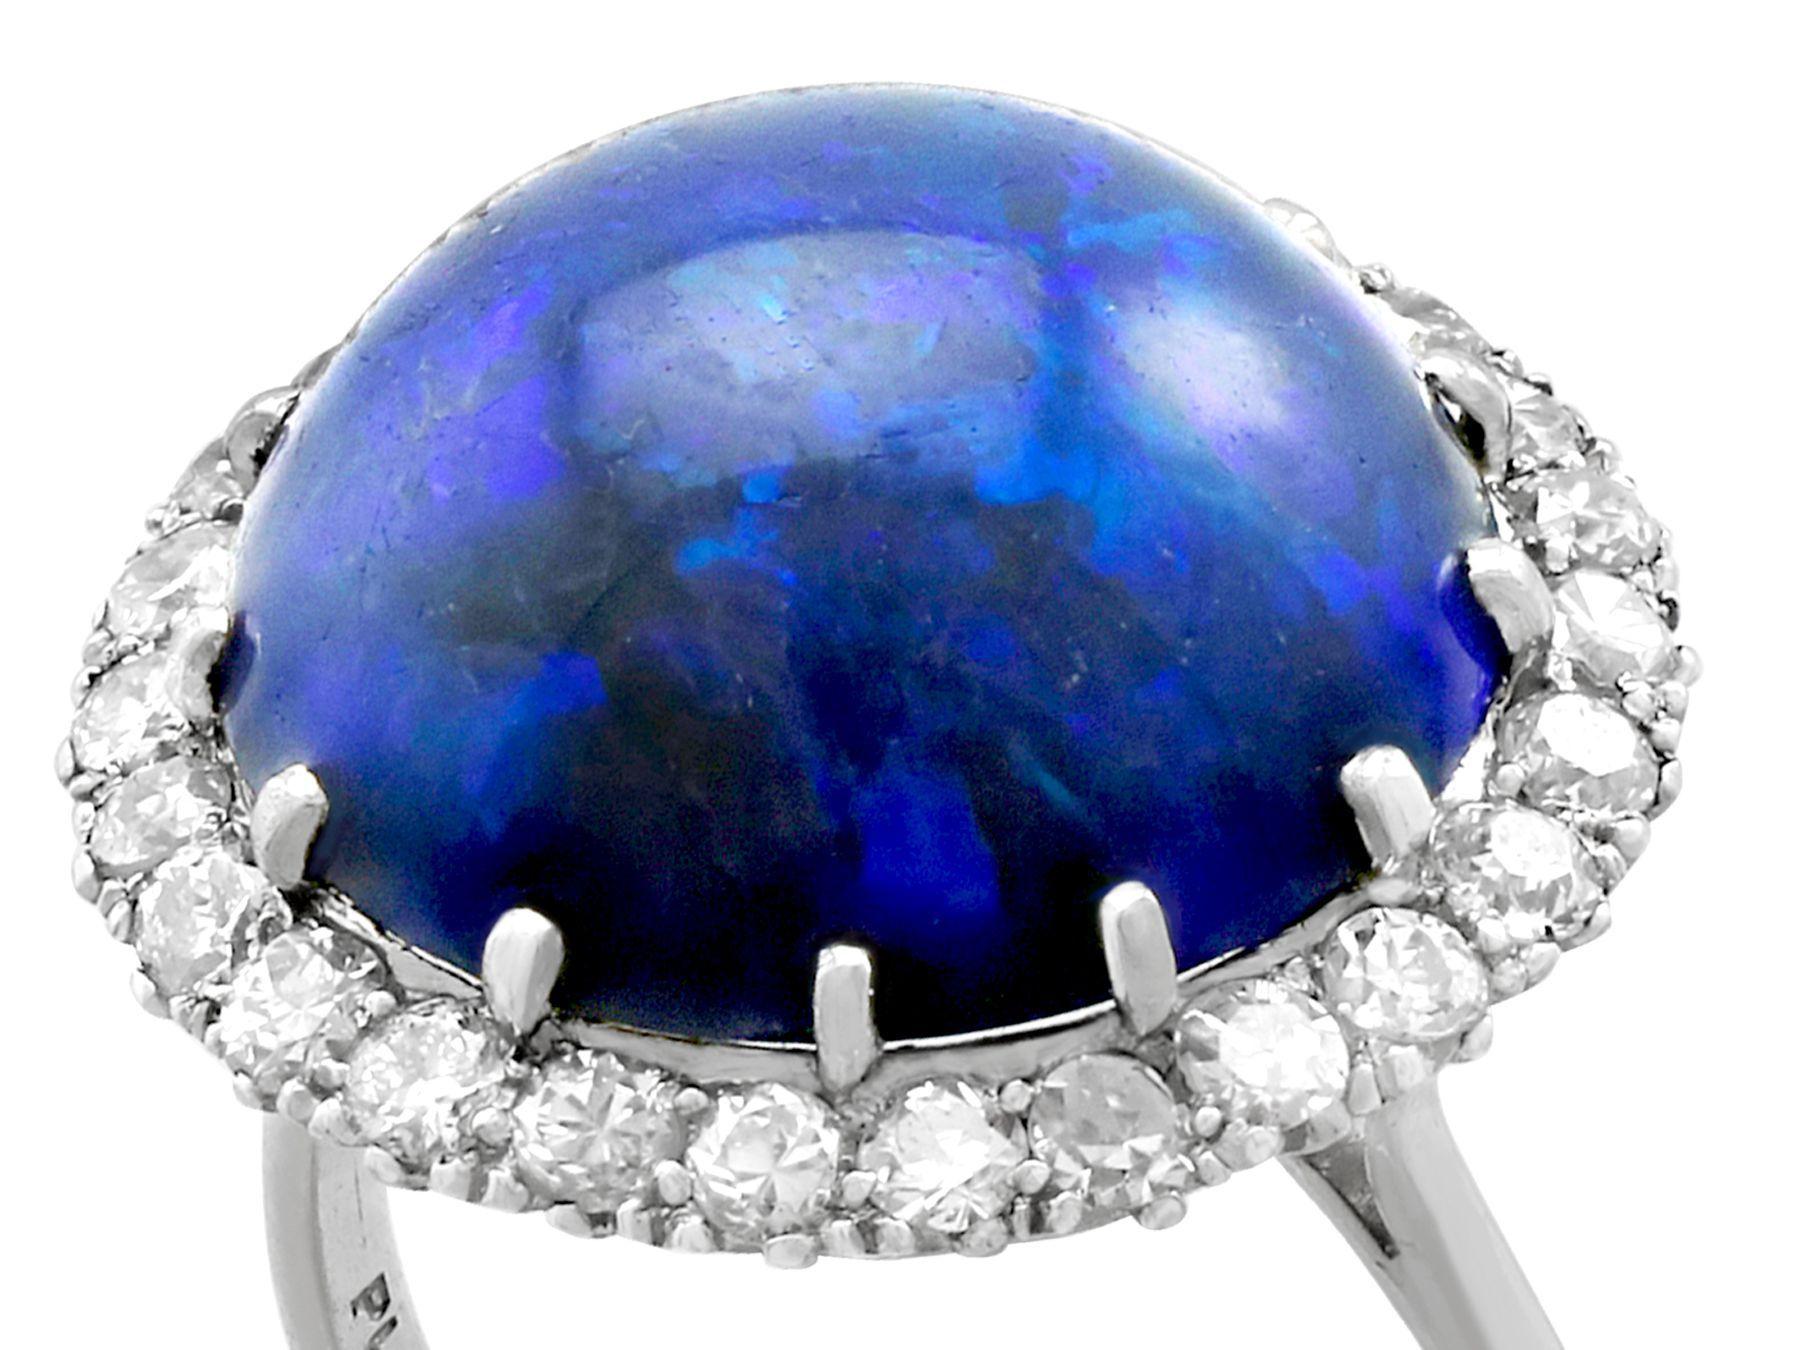 Antique 1930s 7.20ct Cabochon Cut Black Opal and Diamond Platinum Ring In Excellent Condition For Sale In Jesmond, Newcastle Upon Tyne